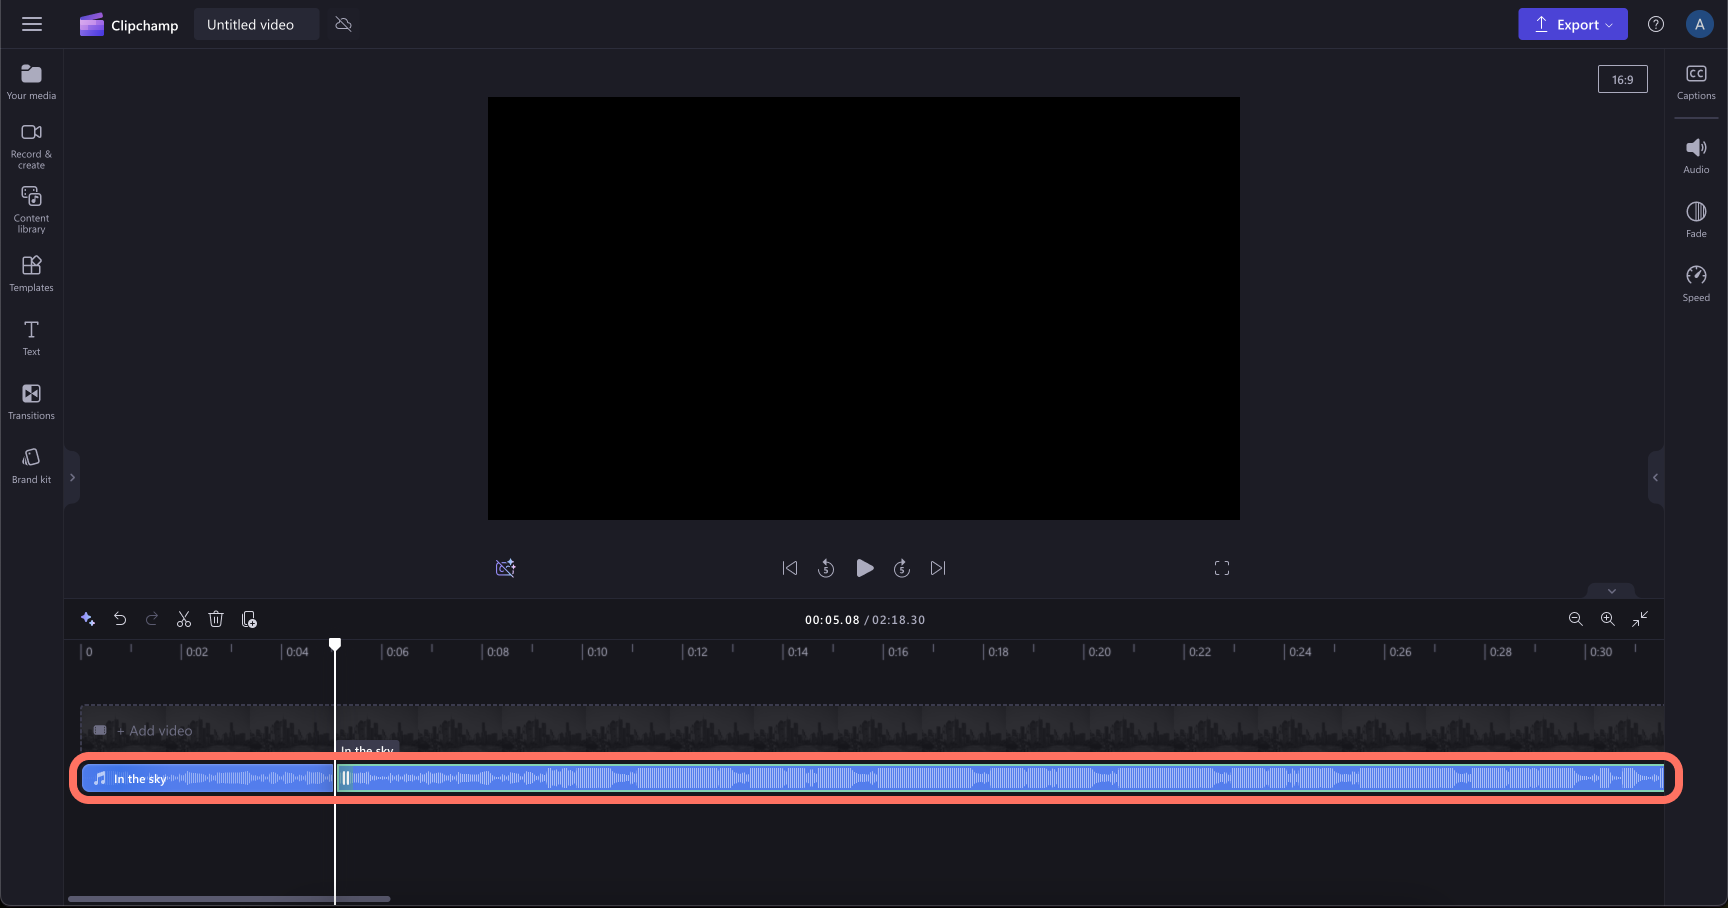 Image showing a split audio clip in the timeline